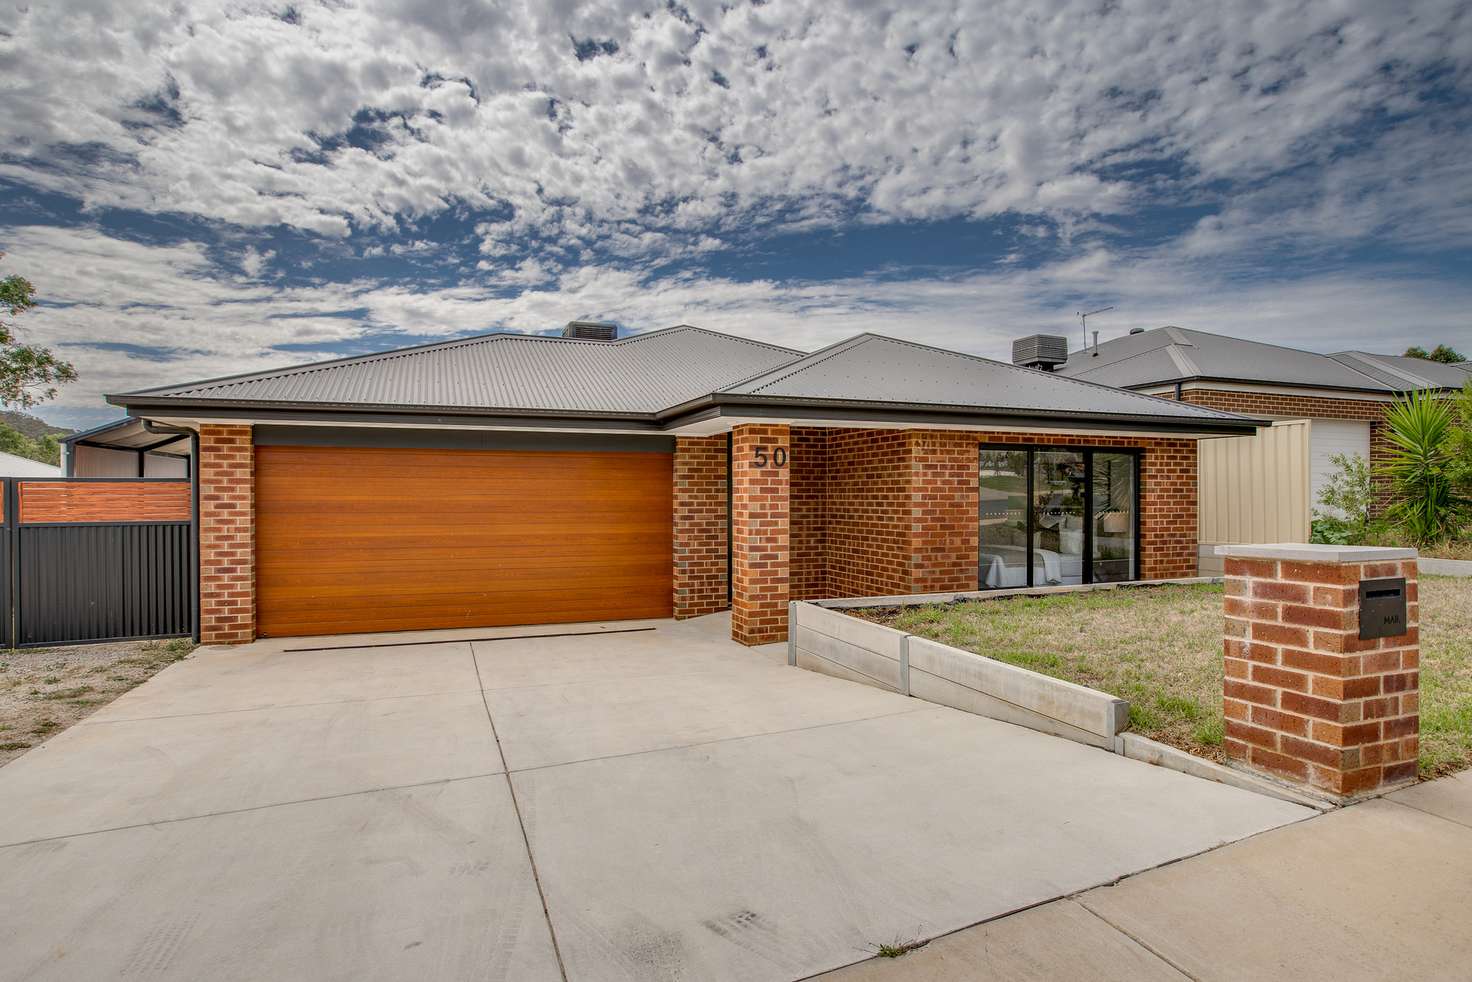 Main view of Homely house listing, 50 Harry Crescent, Hamilton Valley NSW 2641